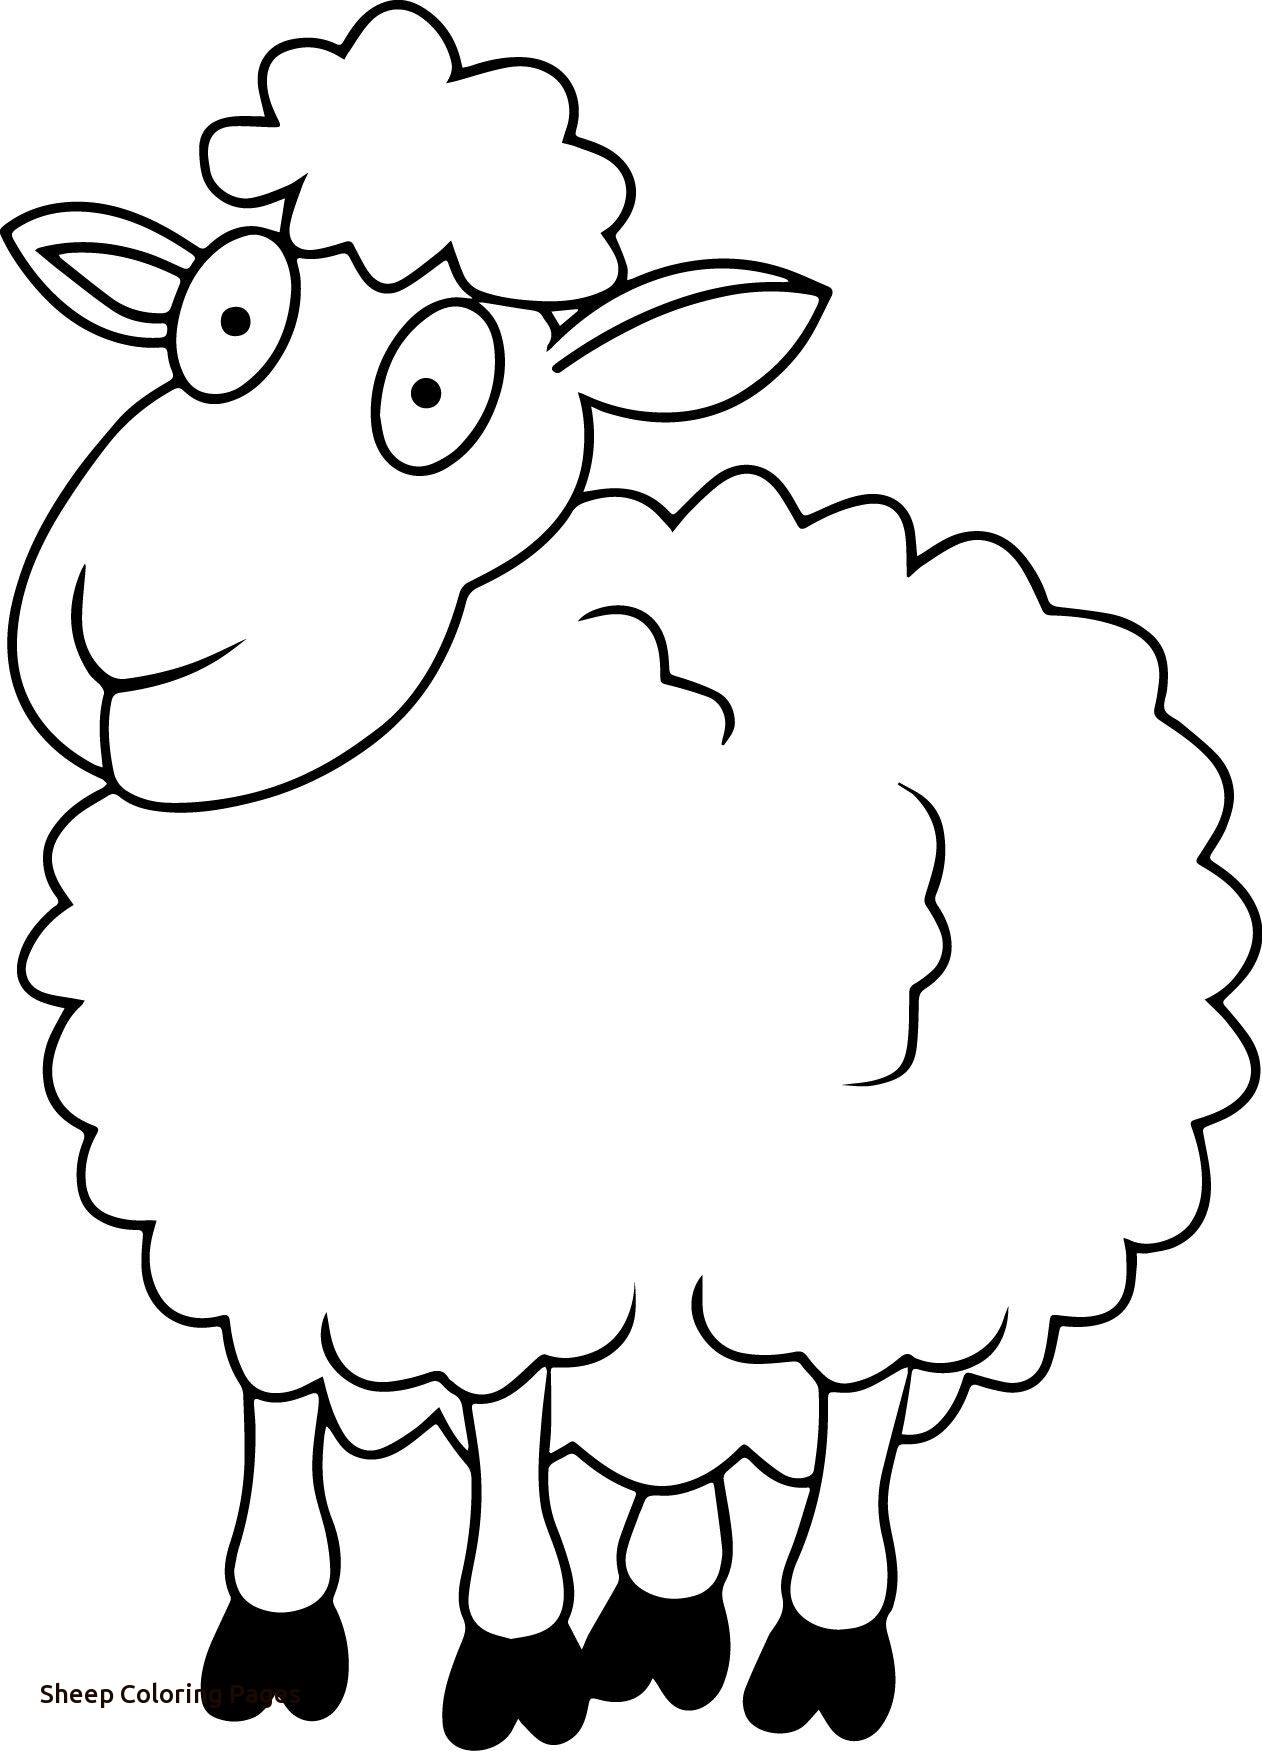 sheep-outline-free-download-on-clipartmag